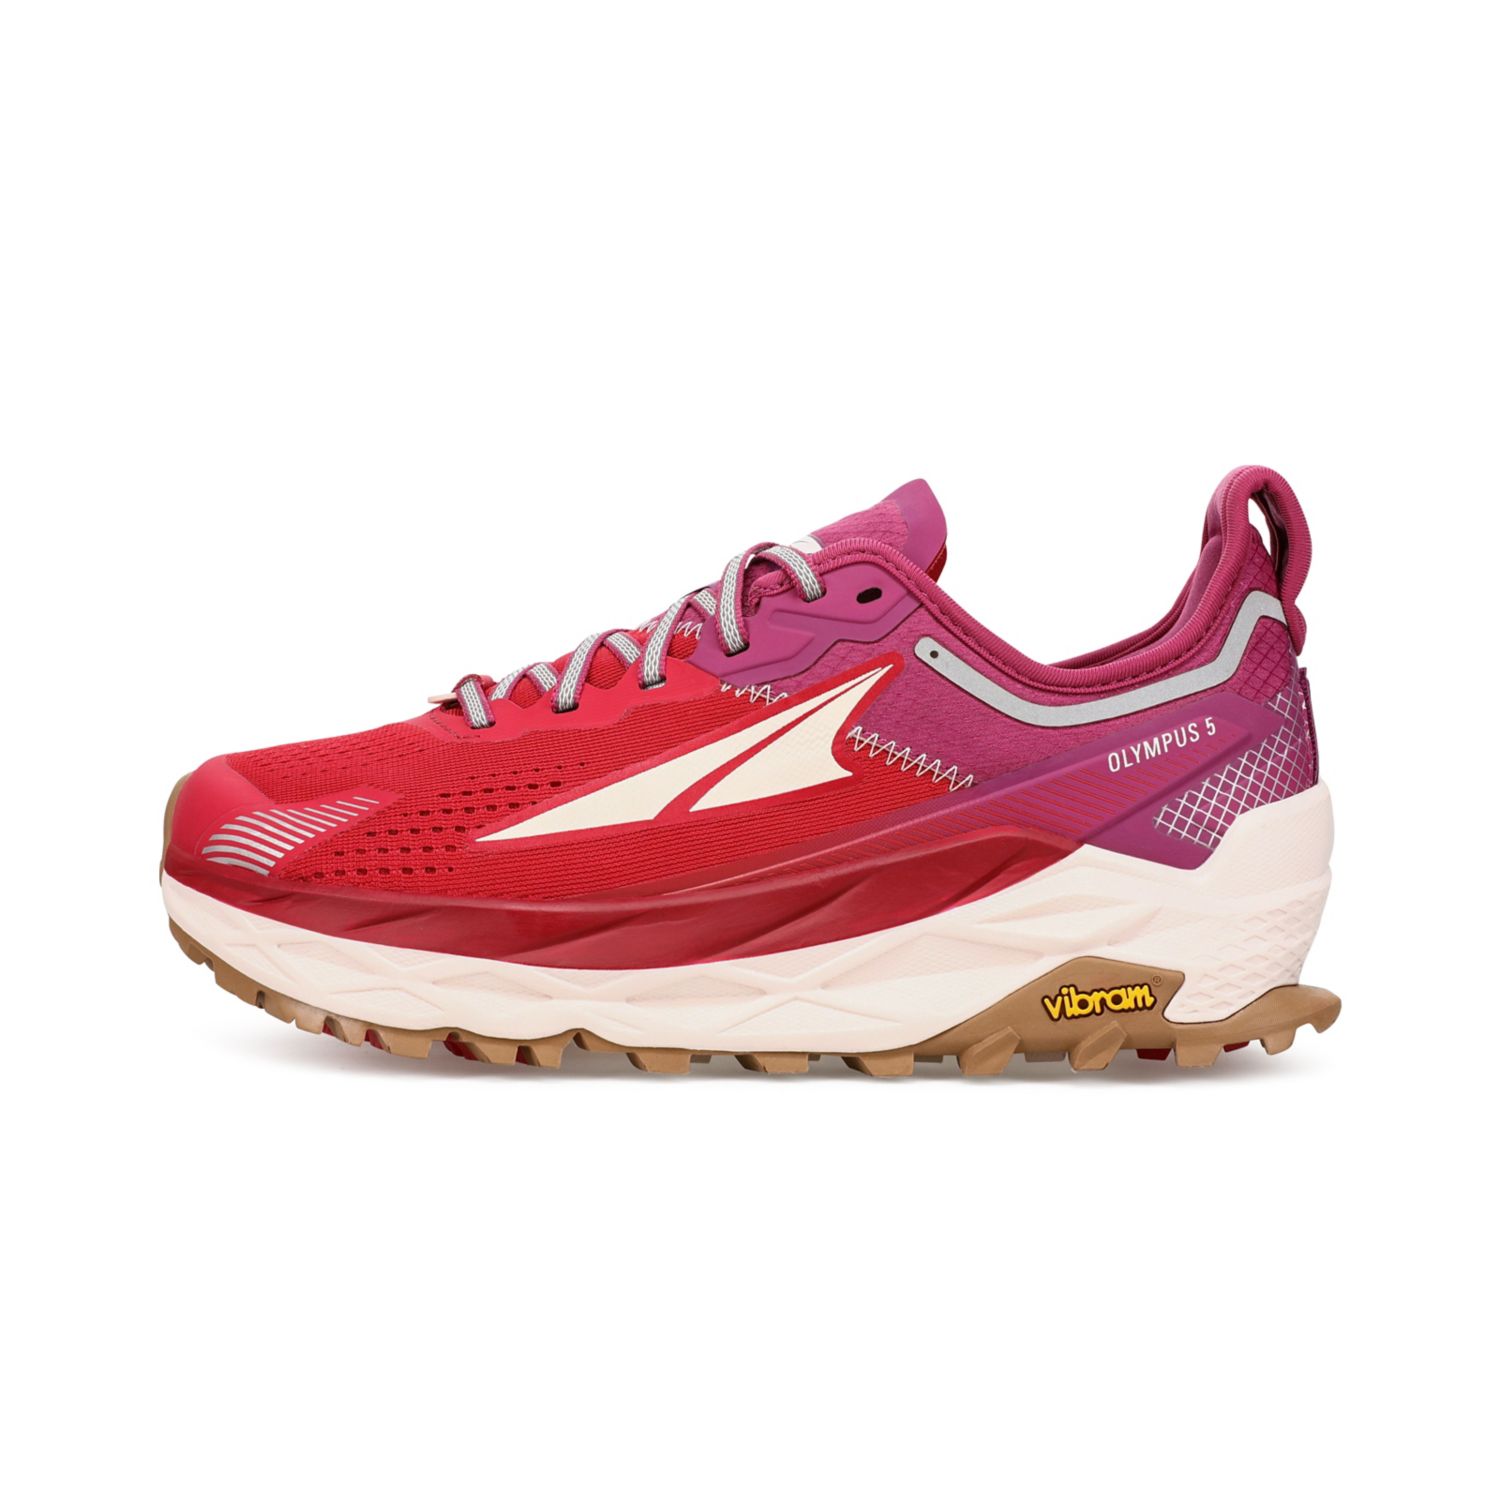 Altra Olympus 5 Women's Trail Running Shoes Red / Purple | South Africa-32907469